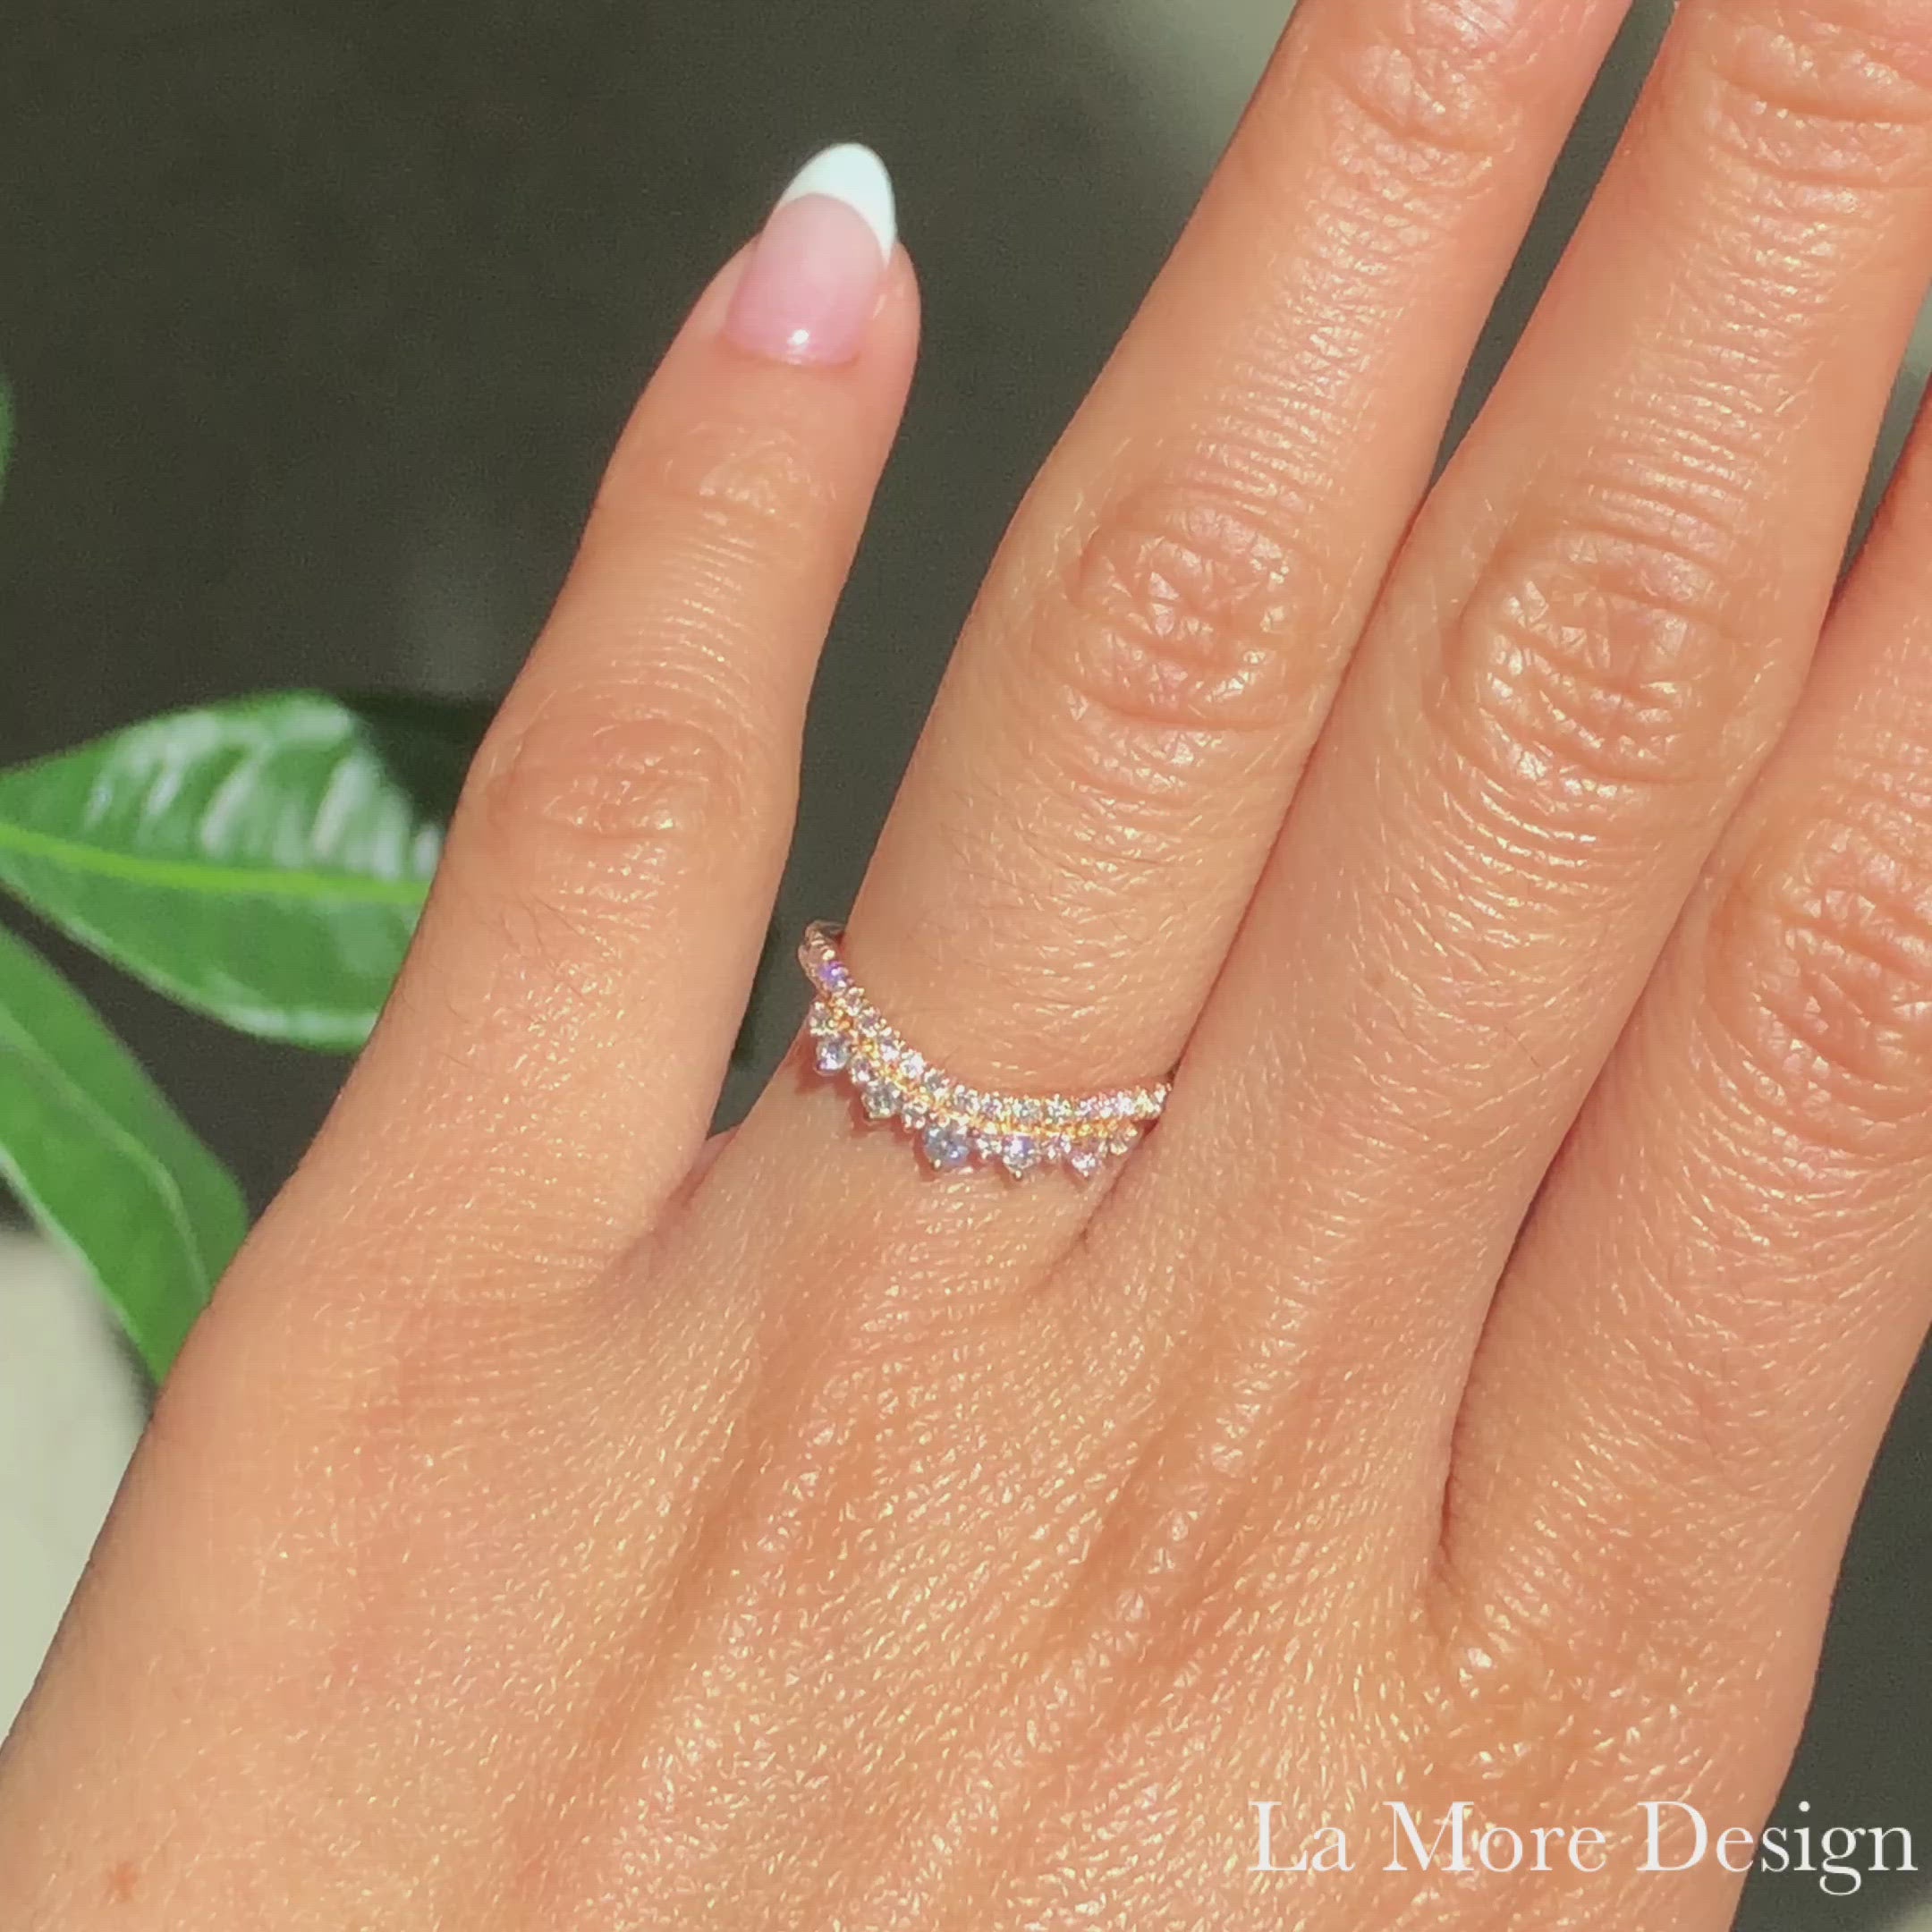 Engagement Ring Designers: 18 Ideas For Brides | Popular engagement rings,  Unique diamond engagement rings, Modern engagement rings